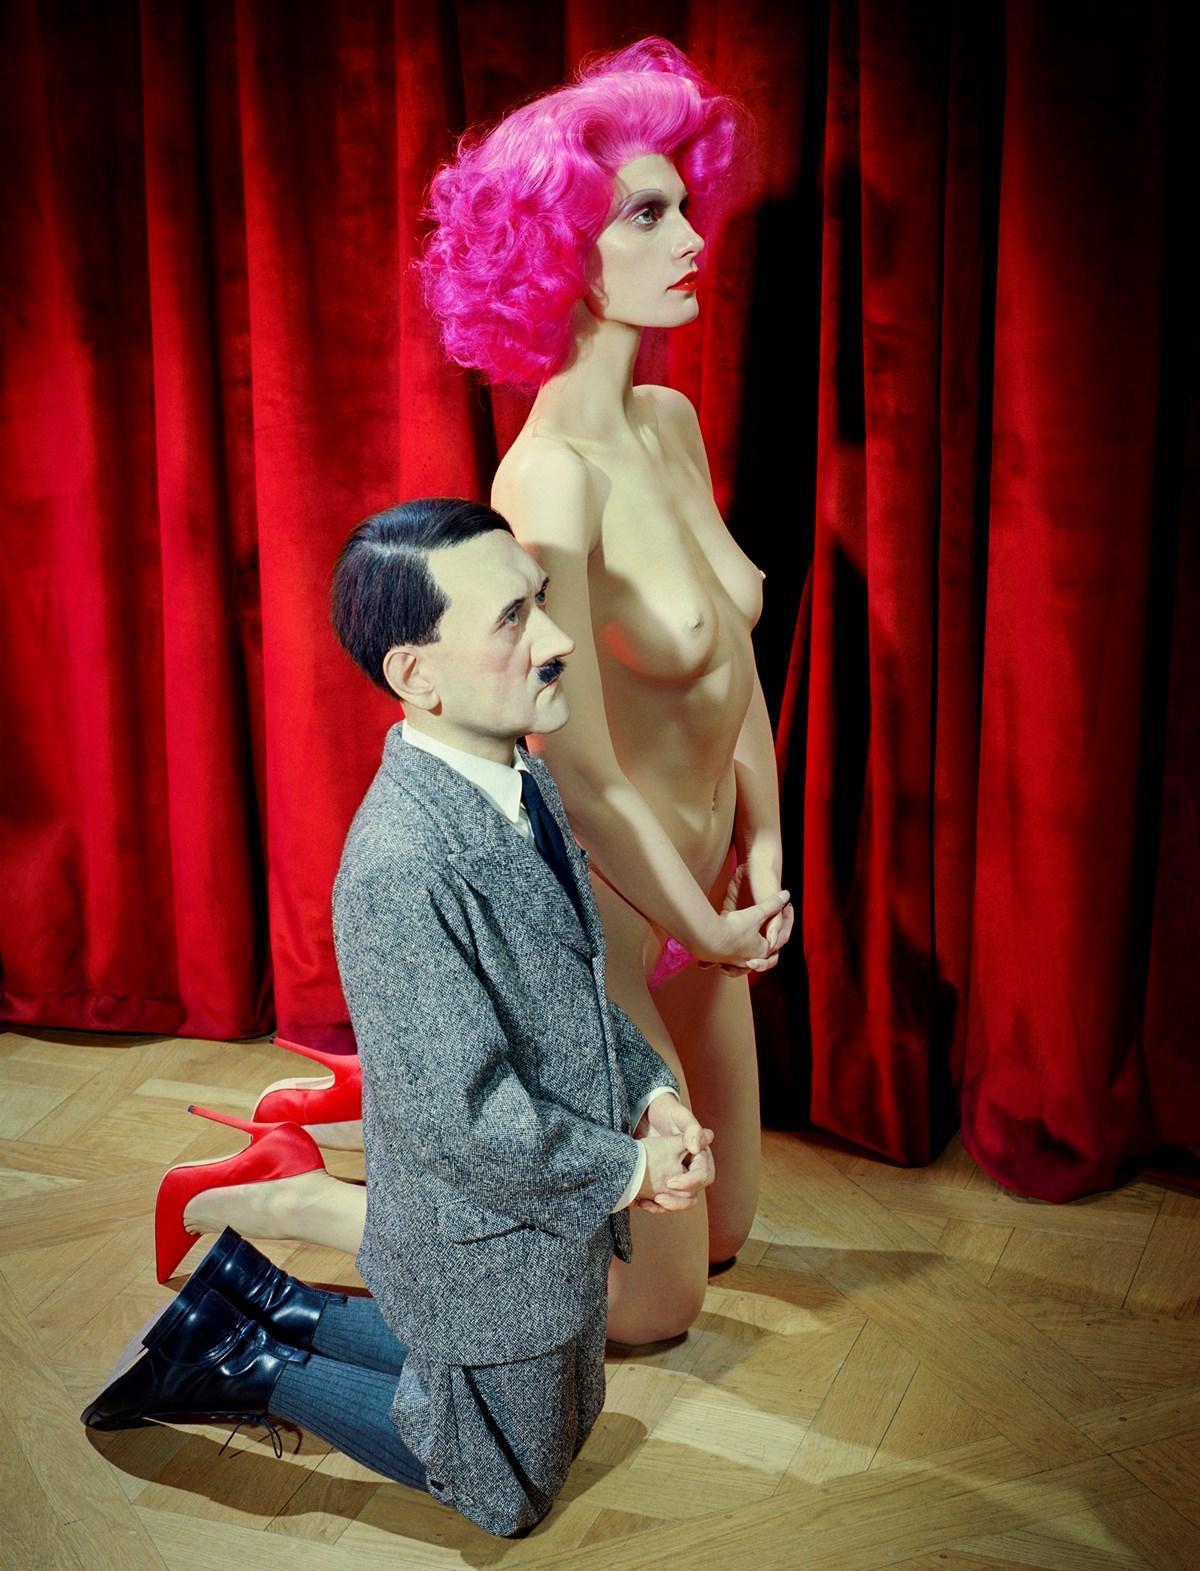 Miles ALDRIDGE (*1964, Great Britain)
Him (after Cattelan), 2016
Chromogenic print
Image 152.5 x 116.5 cm (60 x 45 3/4 in.)
Sheet 164.4 x 128.4 cm (64 3/4 x 50 1/2 in.)
Edition of 6, plus 2 AP; Ed. no. 1/6
Print only

A fiercely original